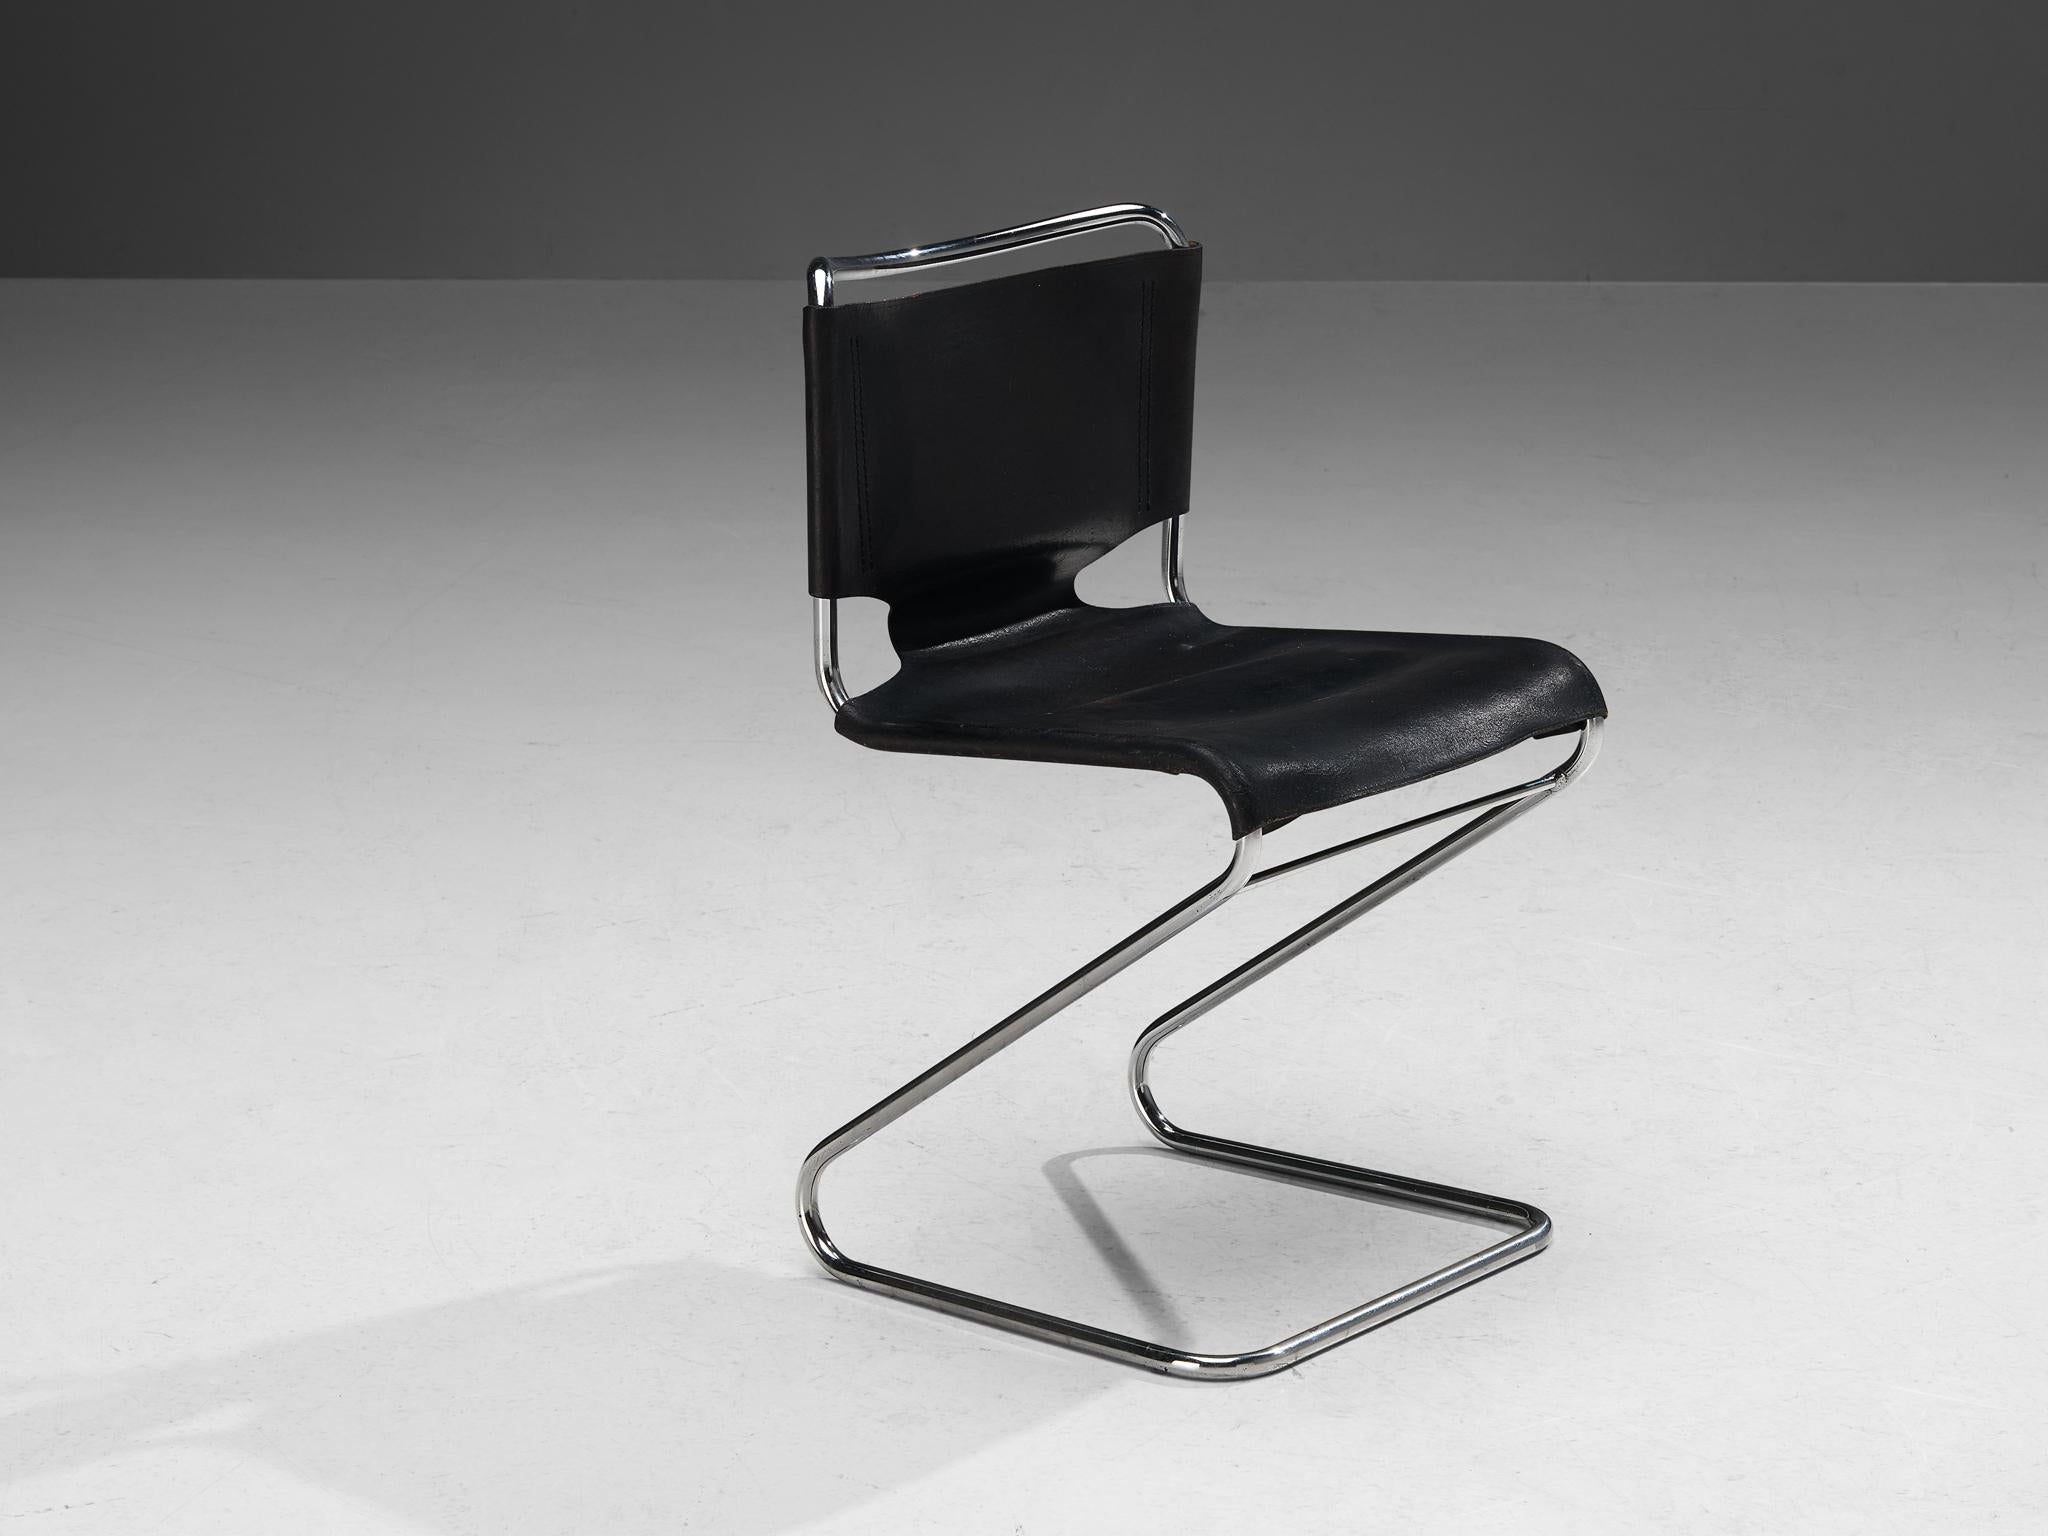 Pascal Mourgue, 'Biscia' dining chair, chrome-plated steel, leather, France, 1960s

This type of chair embodies a dynamic appearance that, for instance, comes forward in the cantilevered tubular frame with curved lines and angular shapes dominating